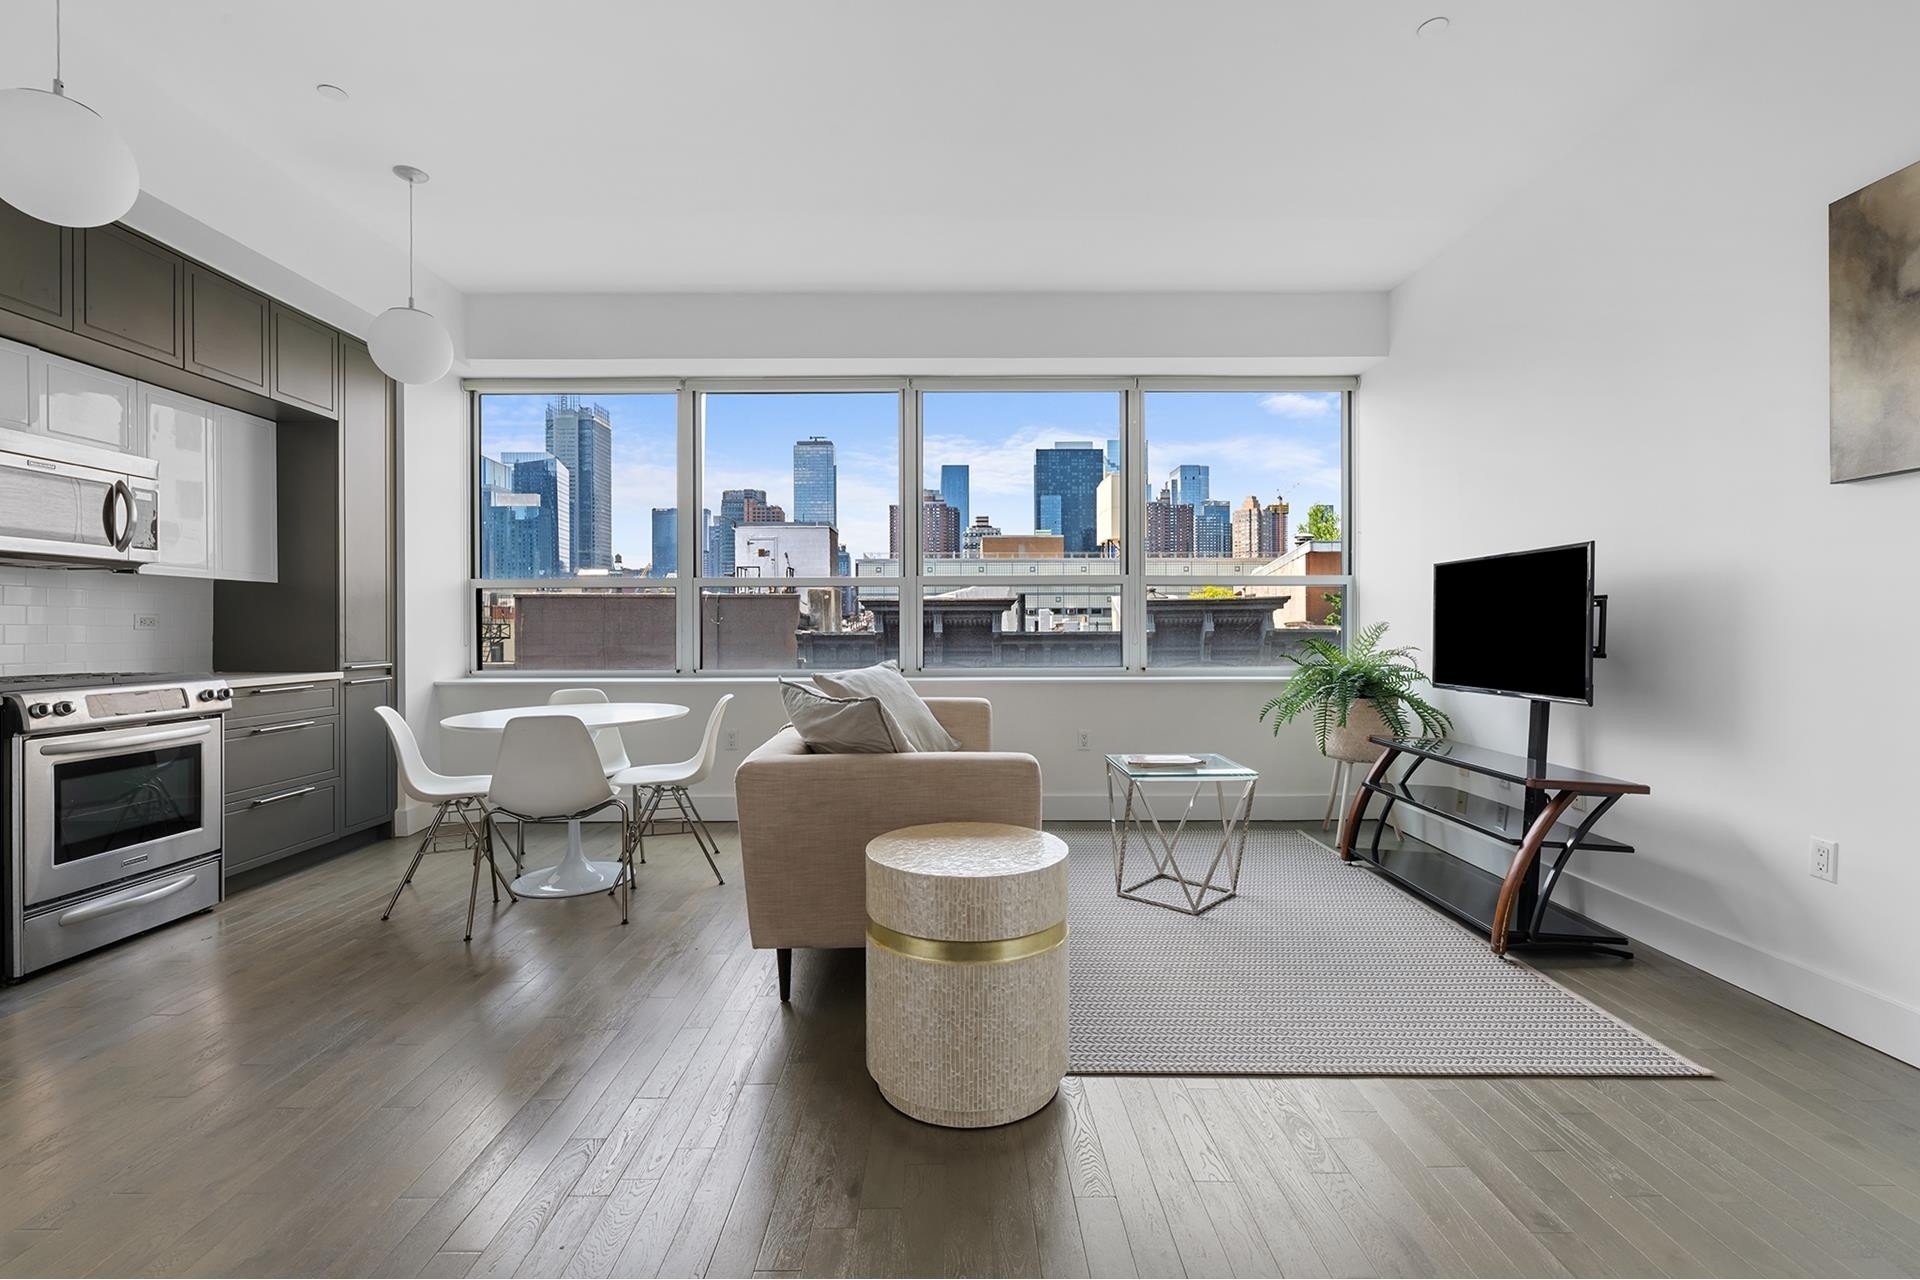 Condominium for Sale at Nine52, 416 W 52ND ST, 617 Hell's Kitchen, New York, NY 10019